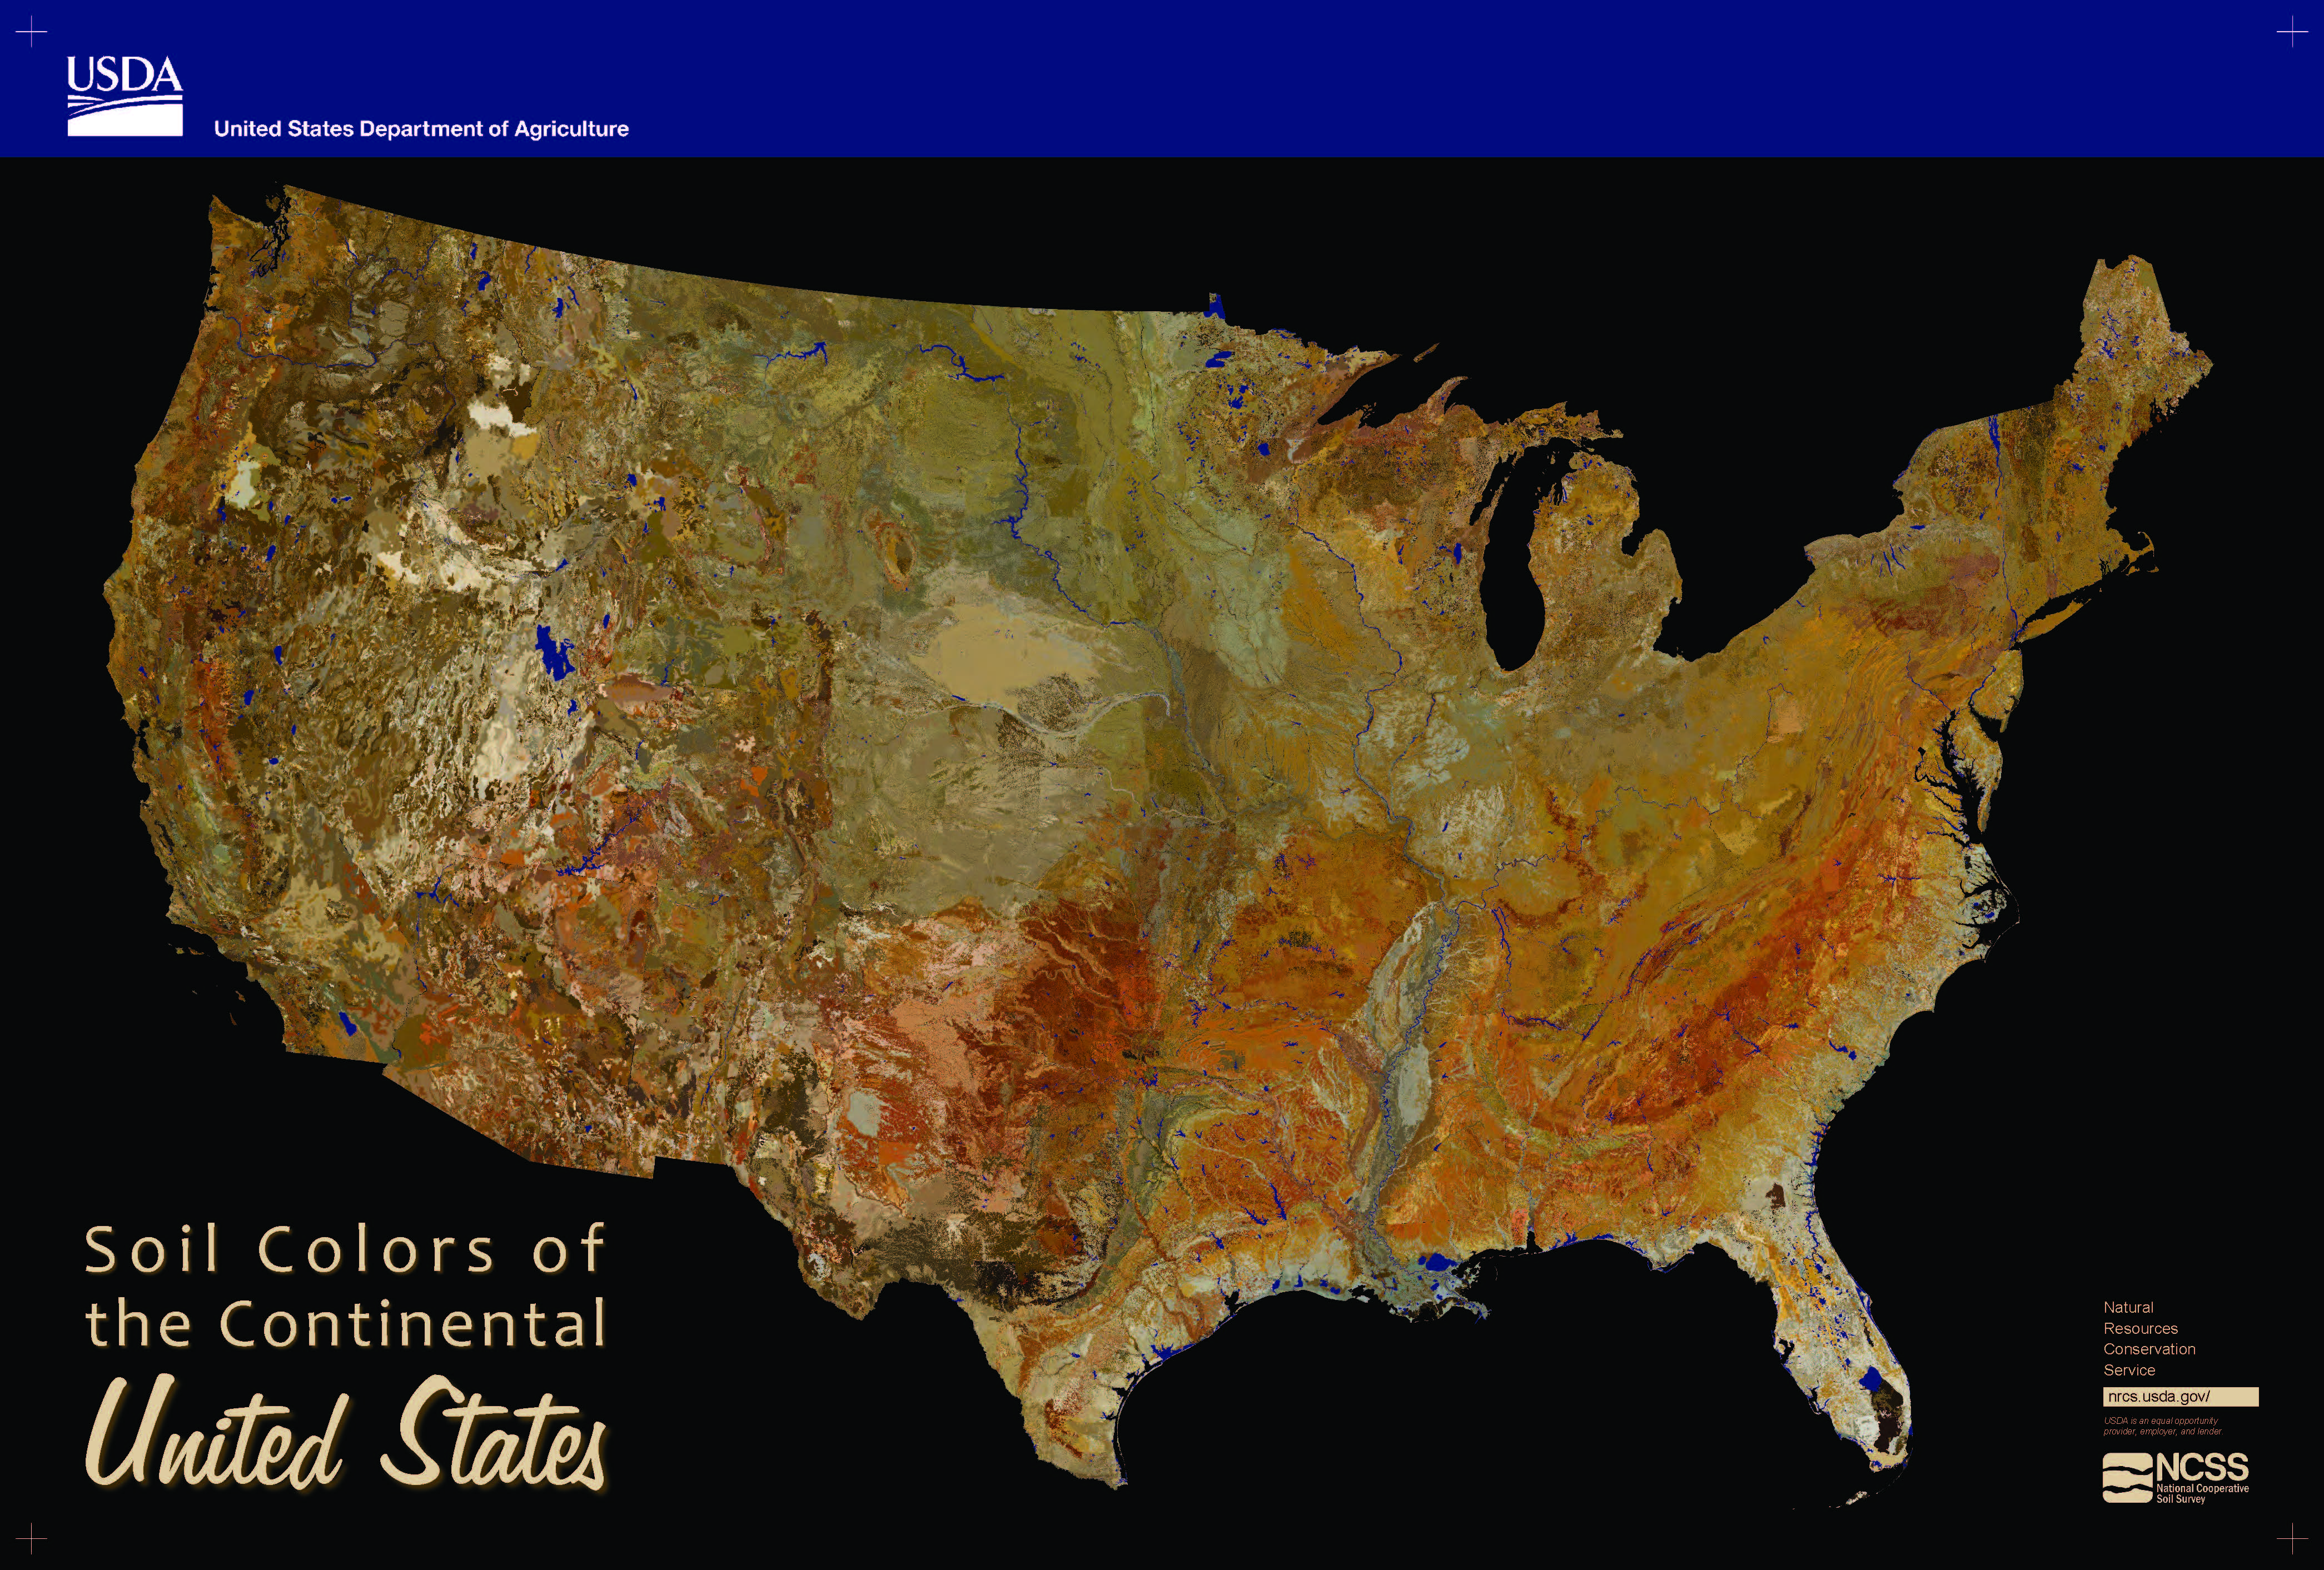 Soil Colors of the Continental United States